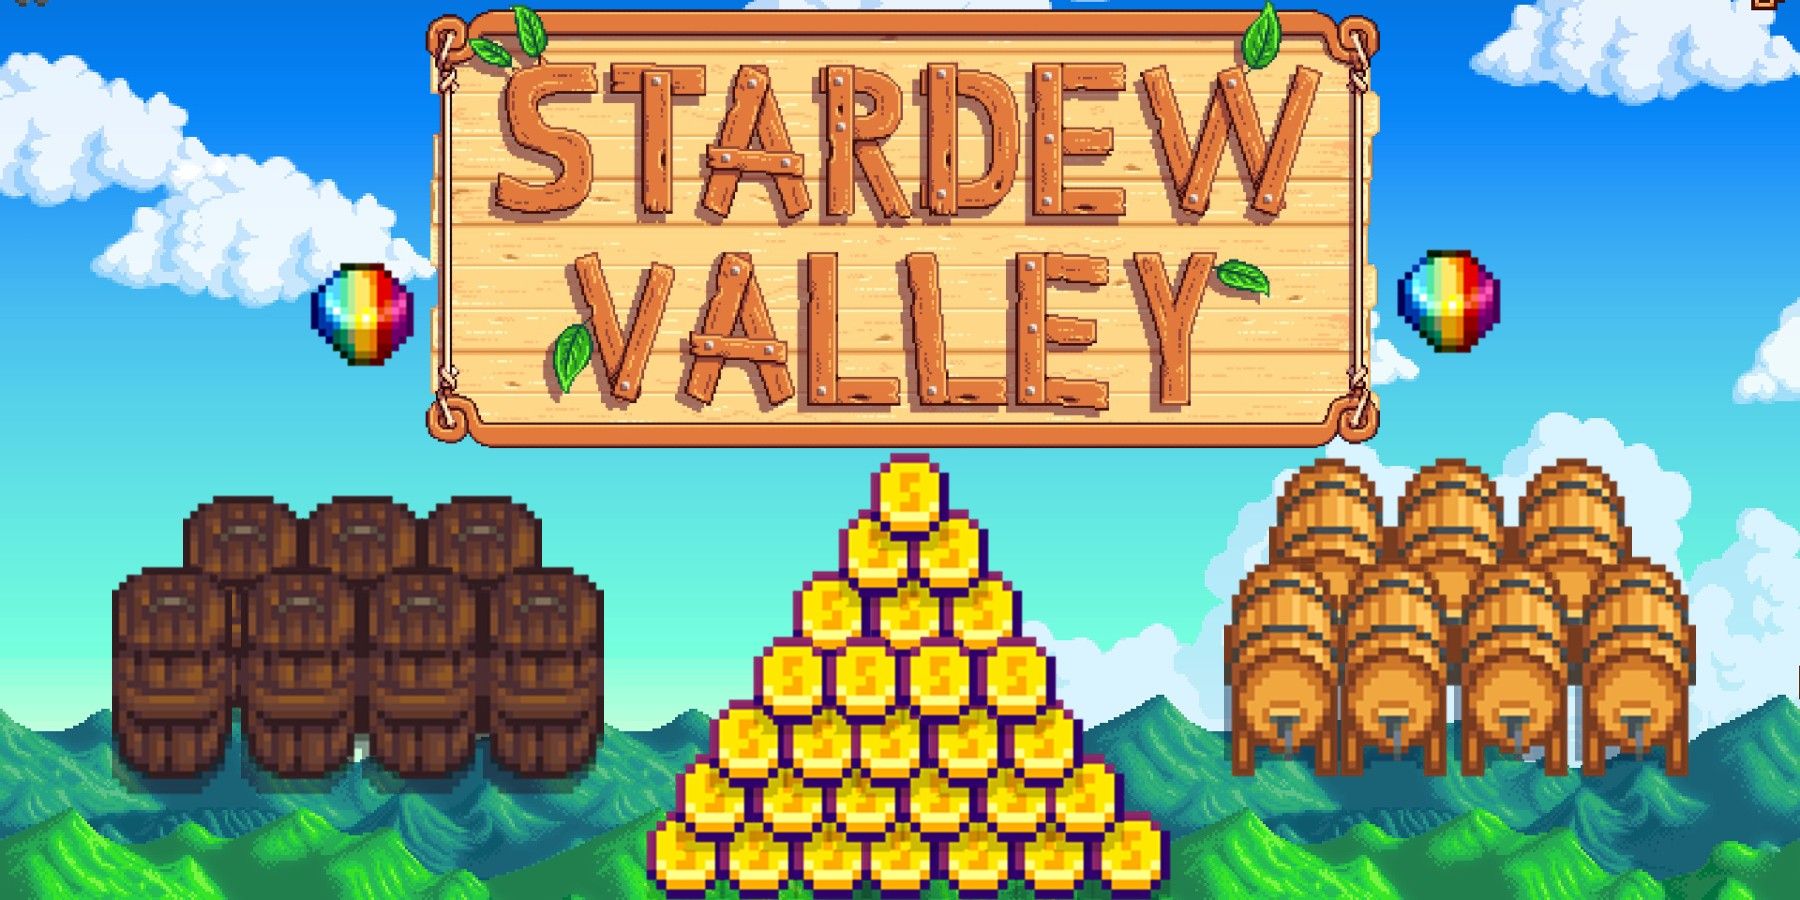 stardew-valley-logo-and-gold-1